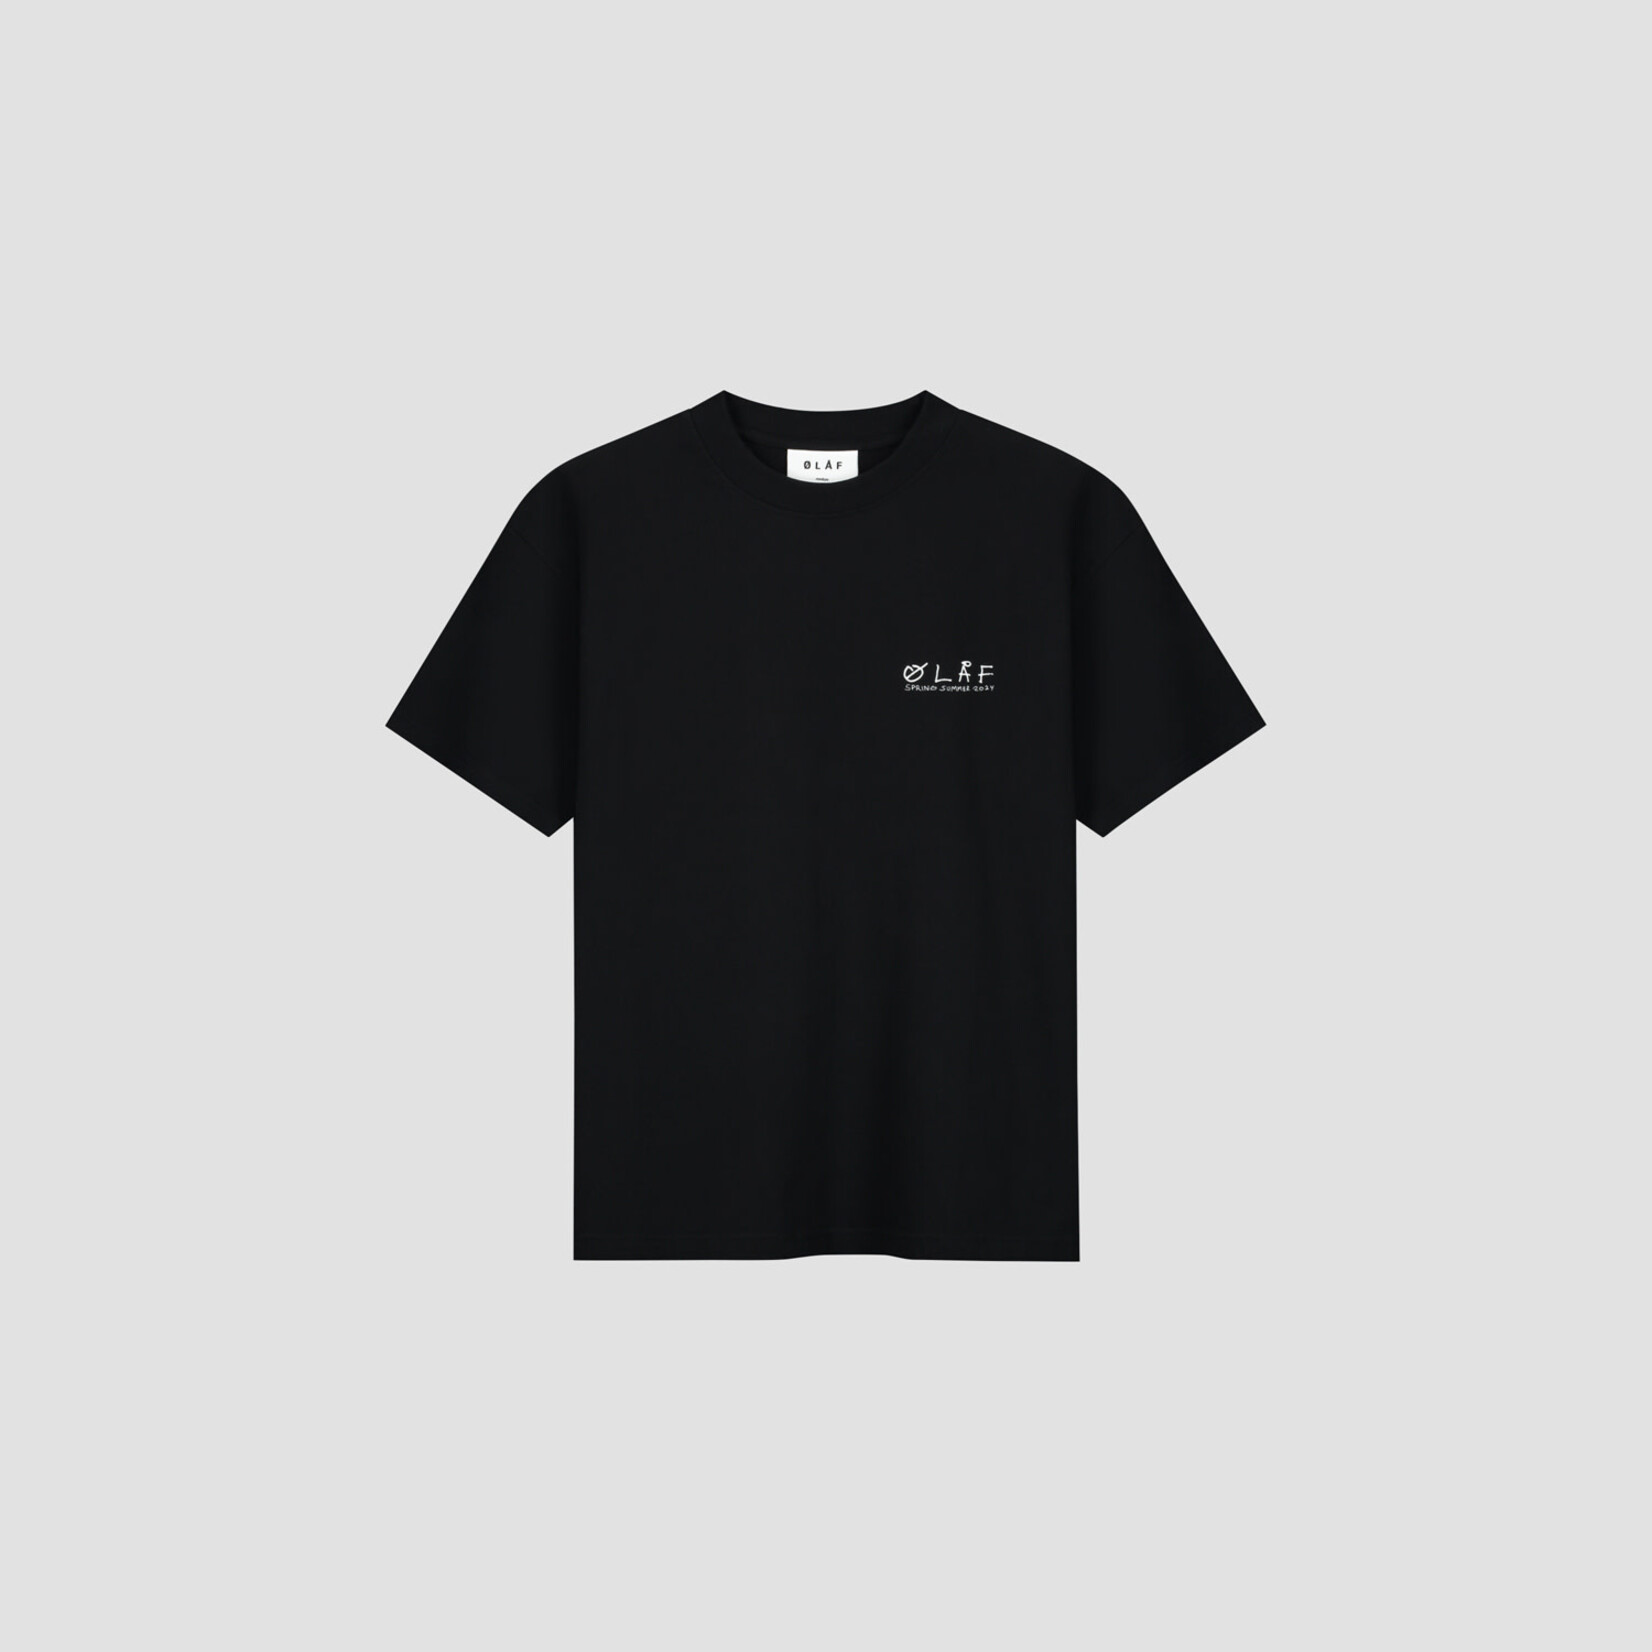 Olaf Hussein Notes Tee - Black / Green